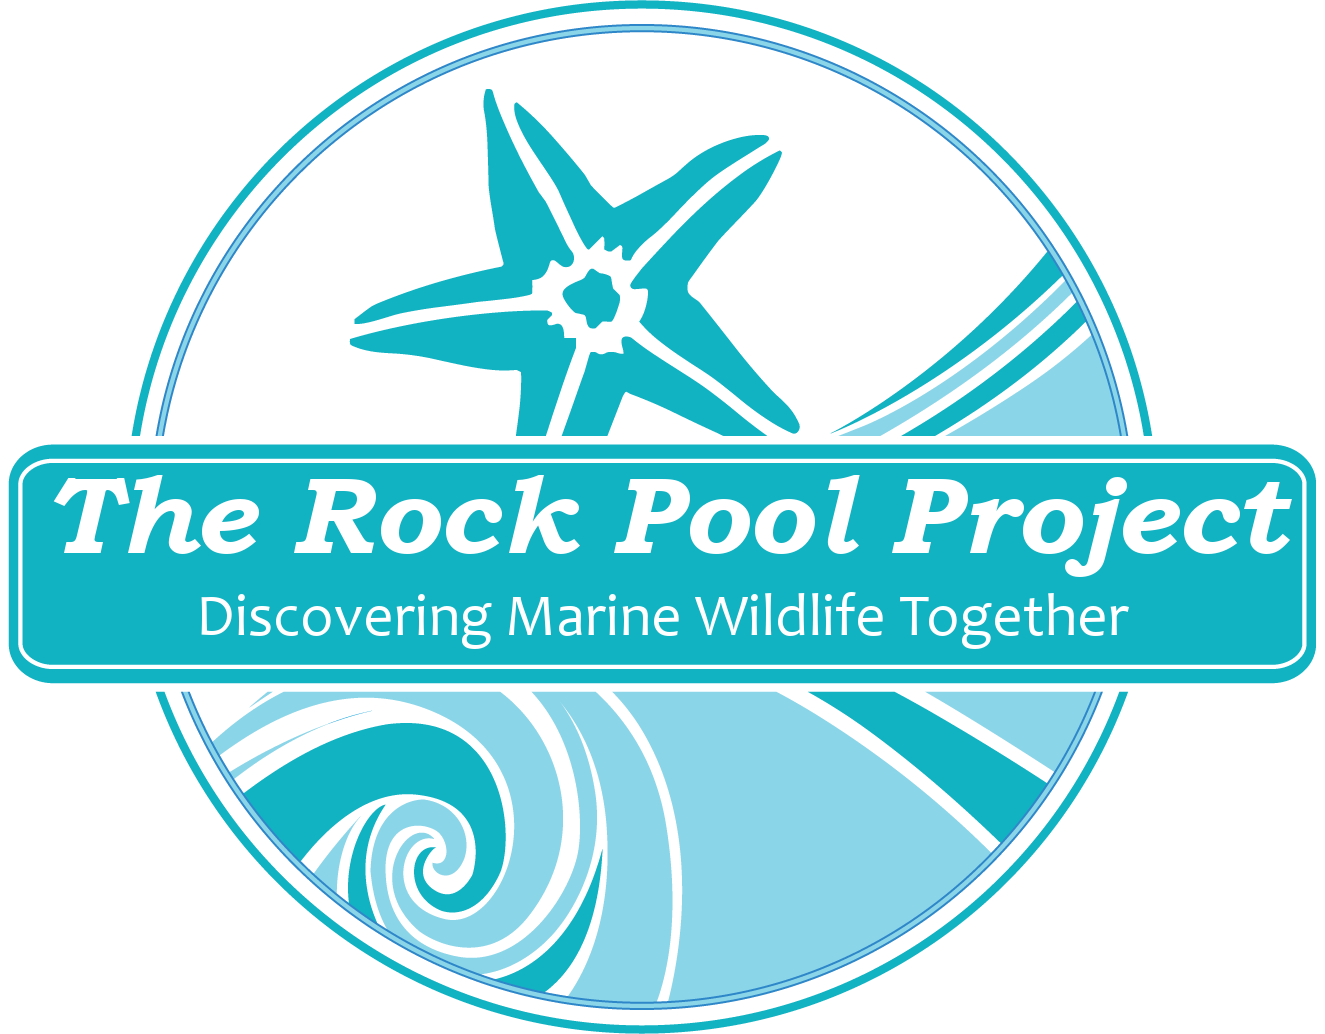 The Rock Pool Project logo